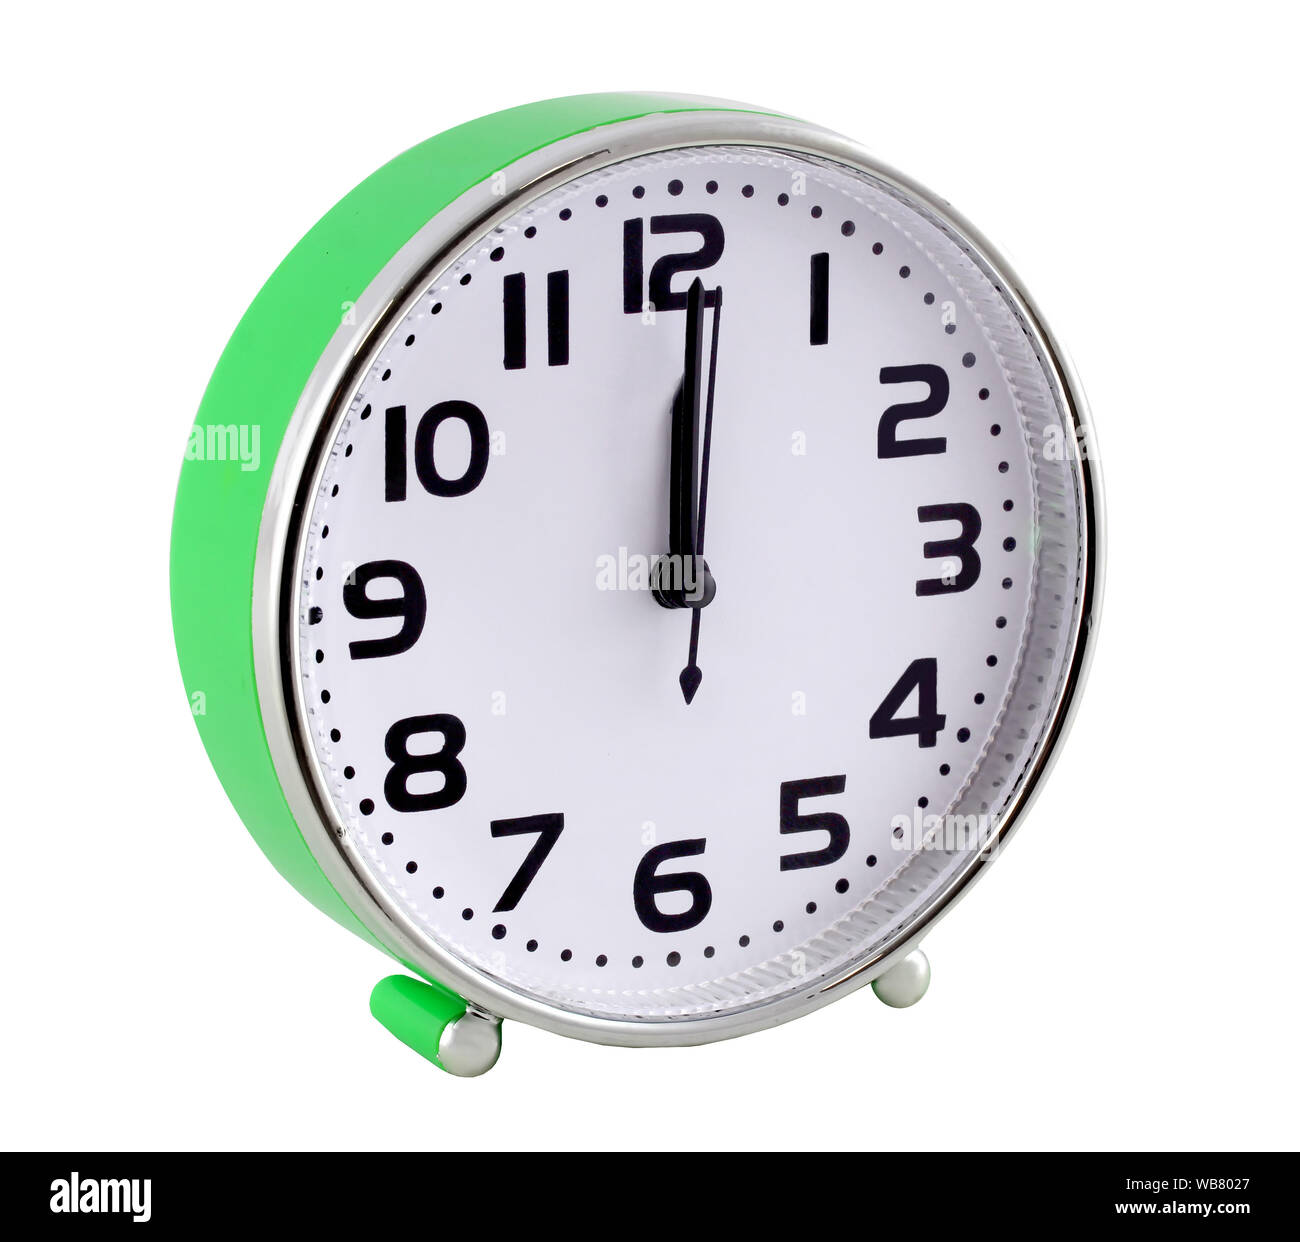 Green alarm clock isolated on white background. The hands are at twelve o'clock. Stock Photo